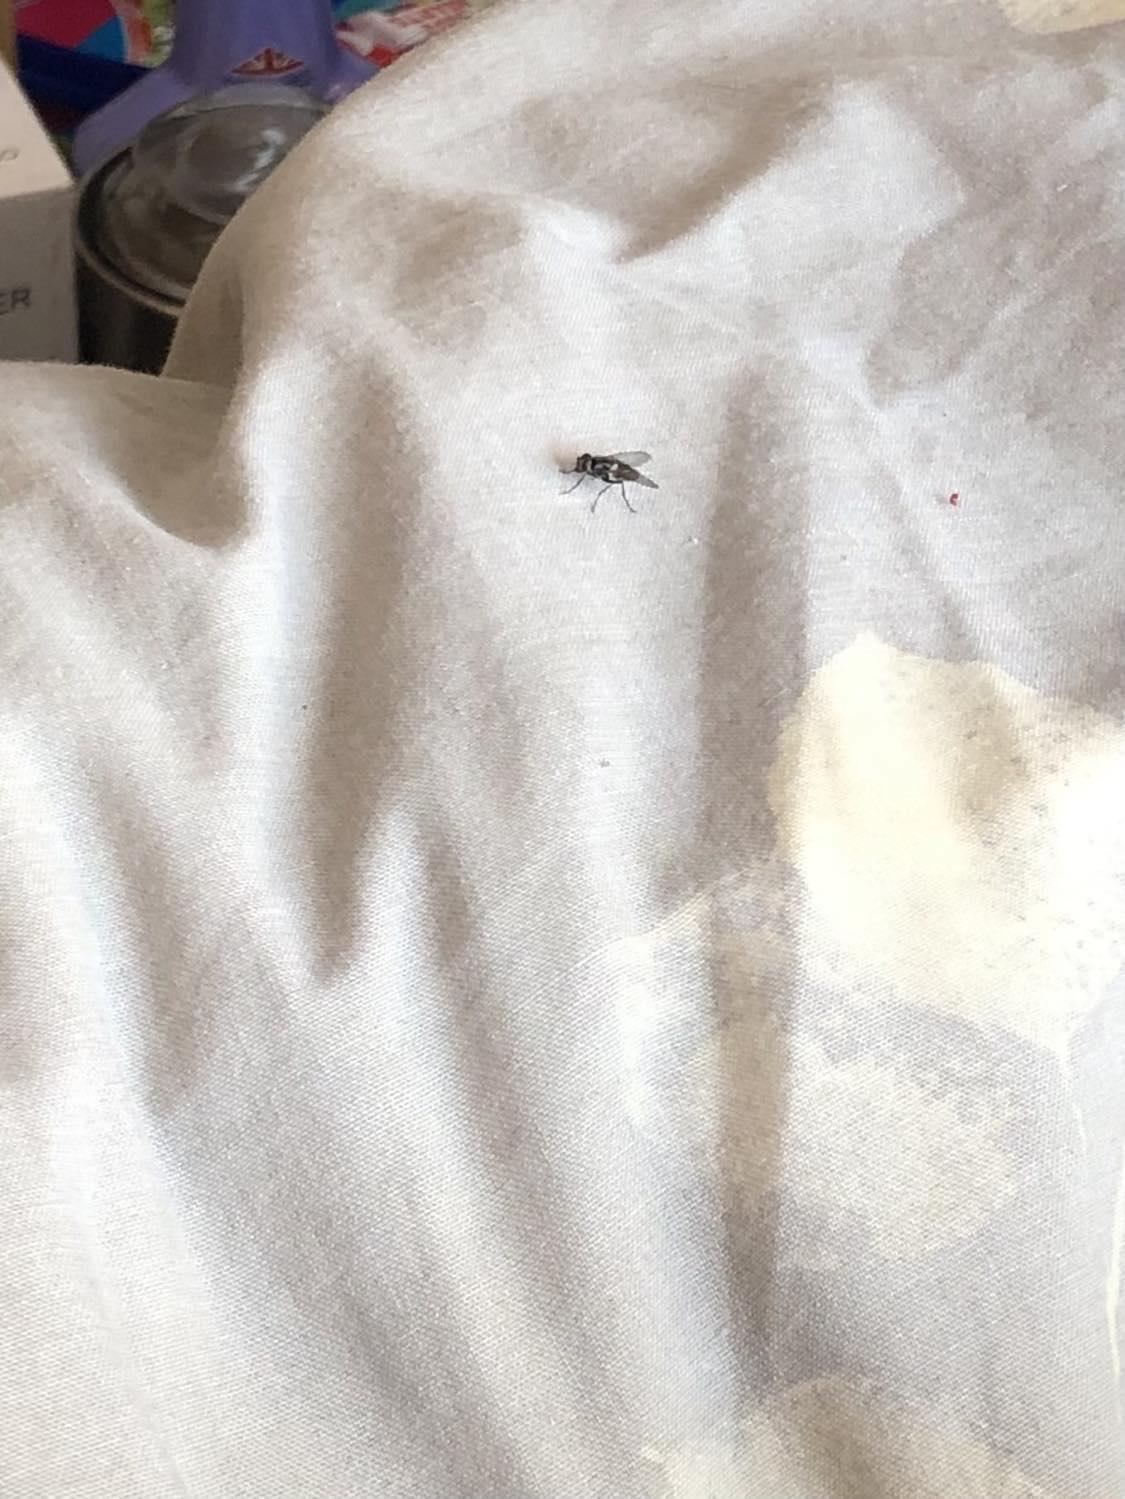 Lil fly on the bed, vaguely close to the side of it, just sitting there beside us.